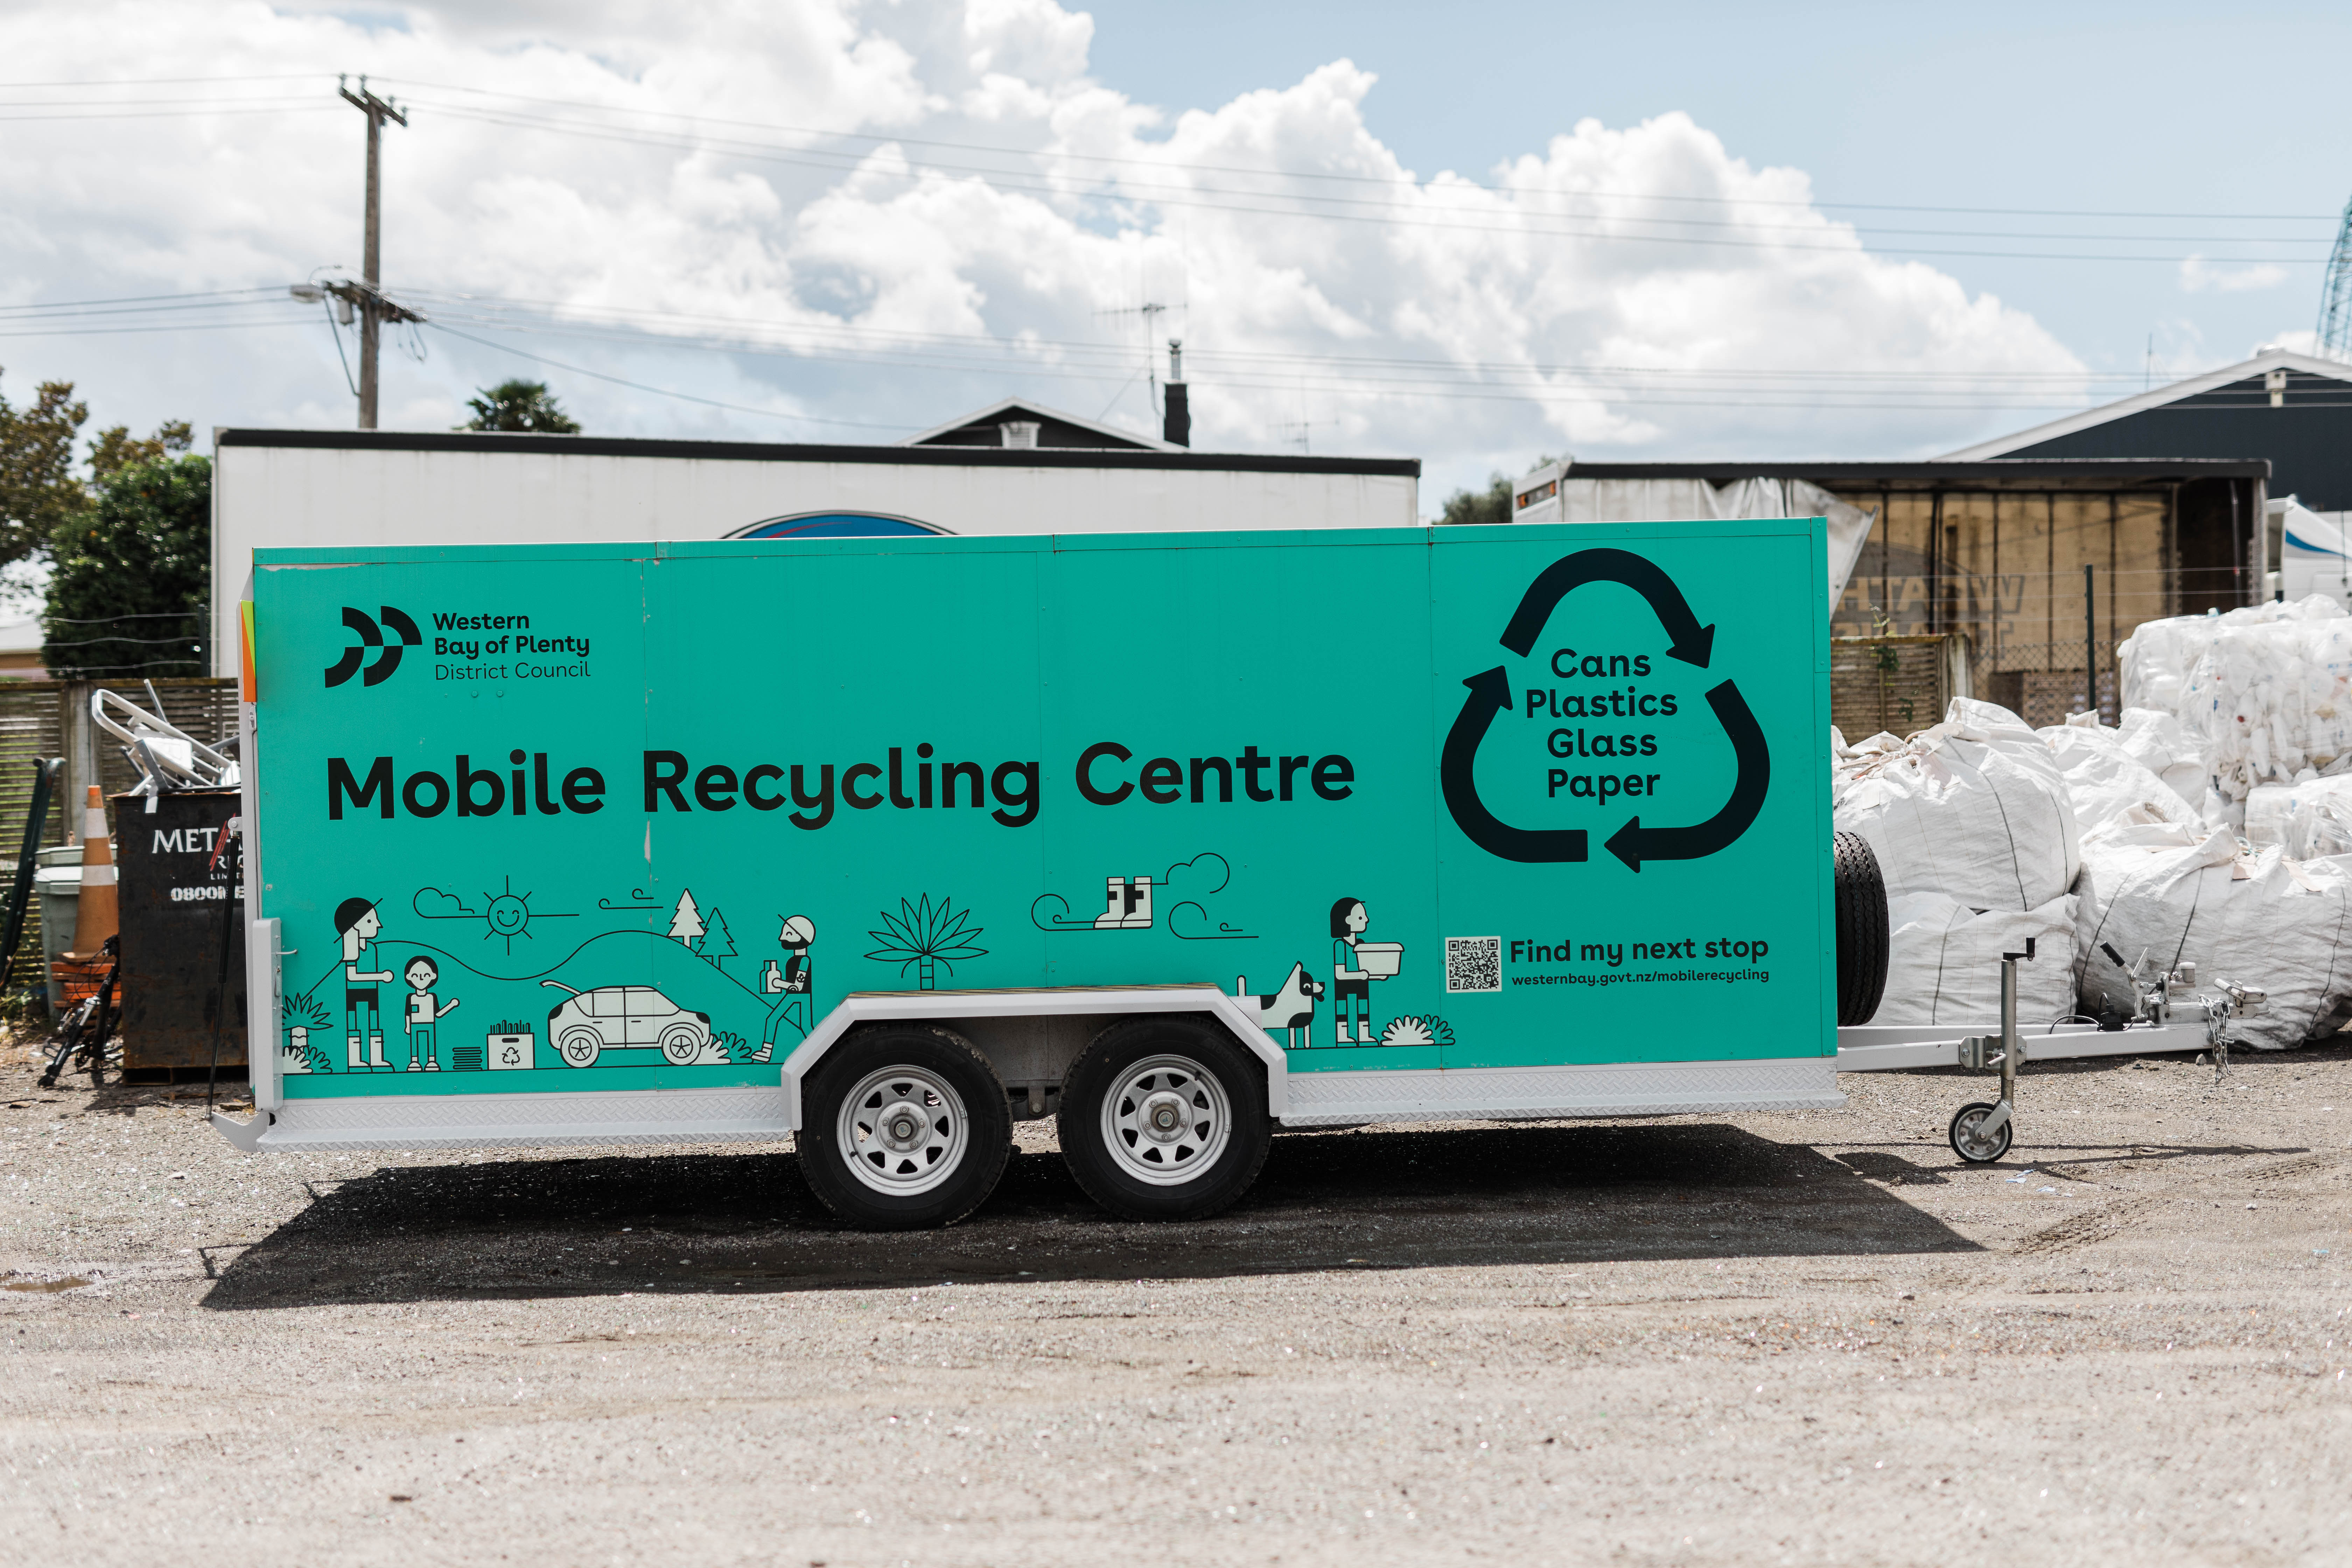 One of the trailers currently helping rural residents recycle in the Western Bay.